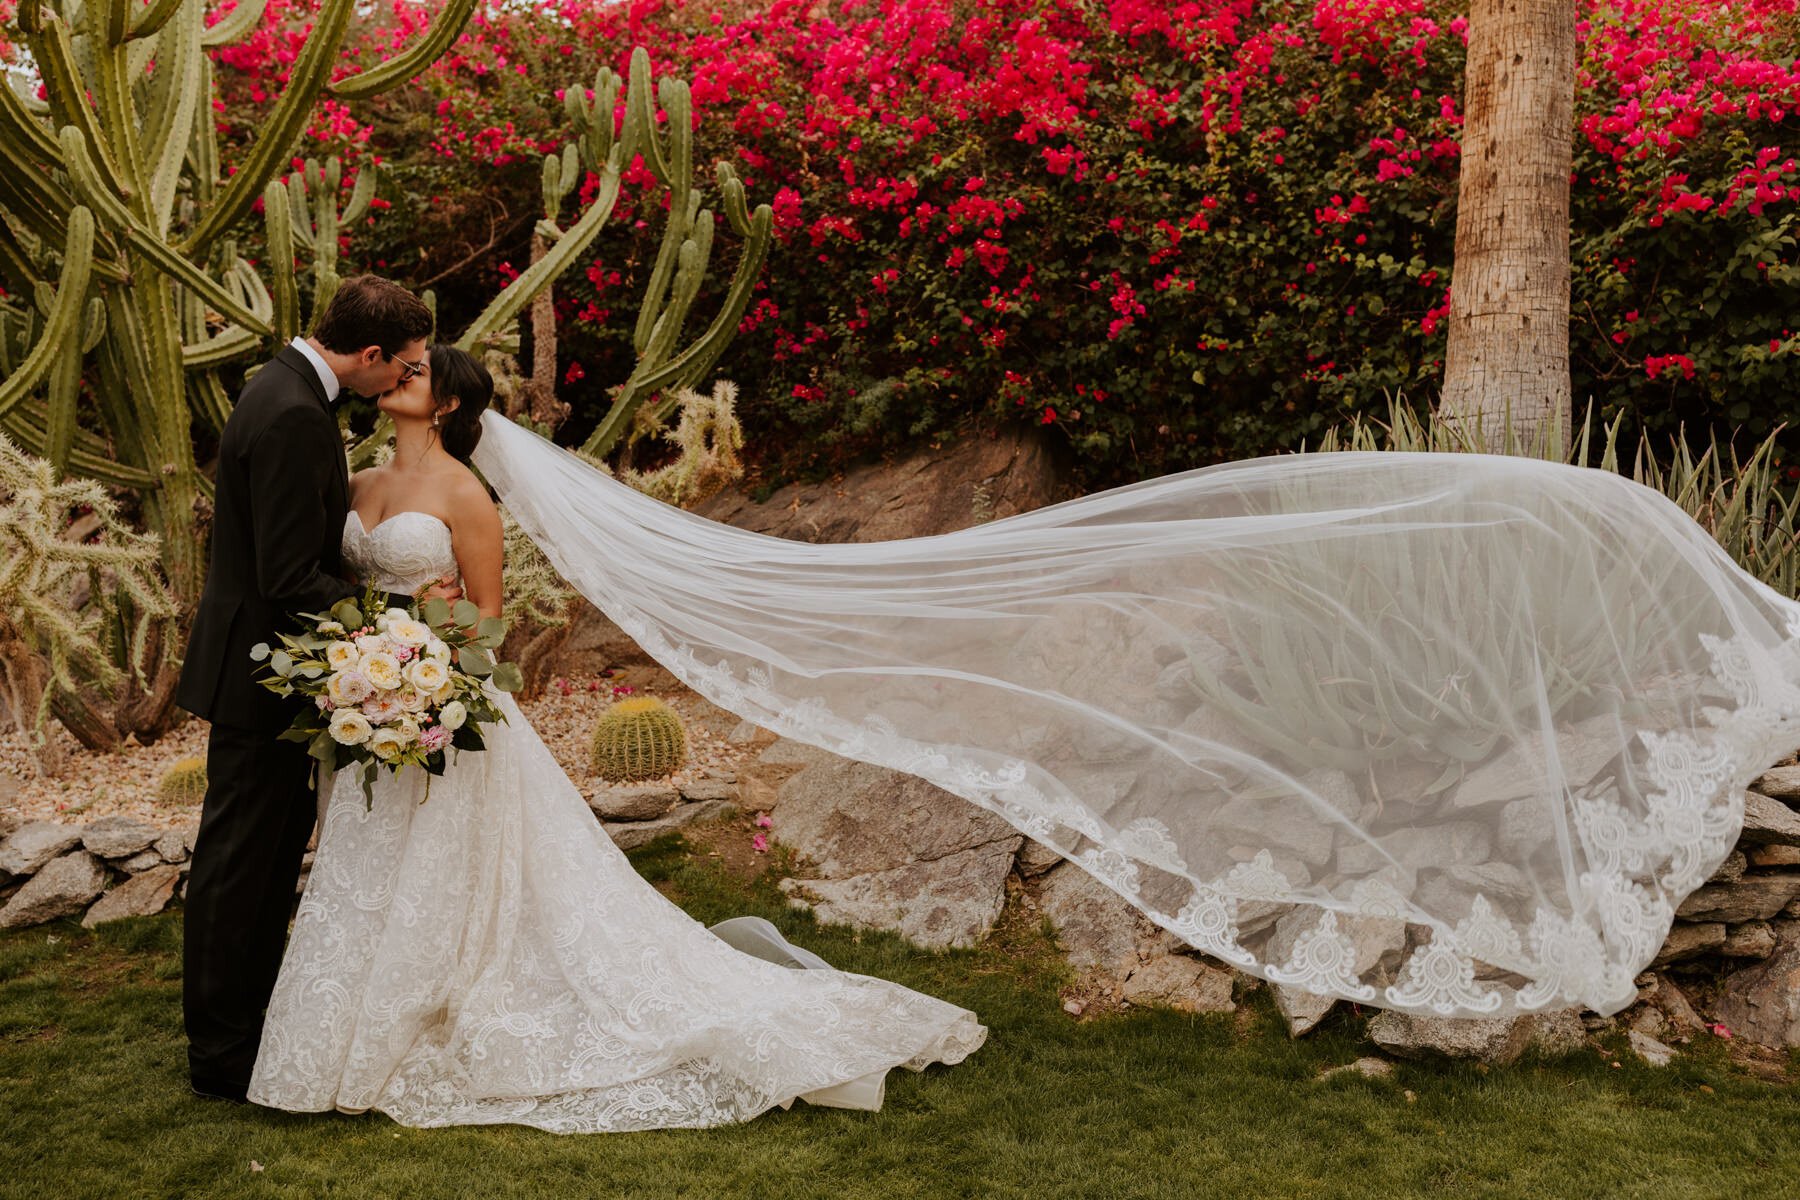 Bride and groom kissing with flowing veil, Spencer’s Restaurant Palm Springs Wedding Ceremony, Palm Springs Wedding Photographer | Tida Svy Photo